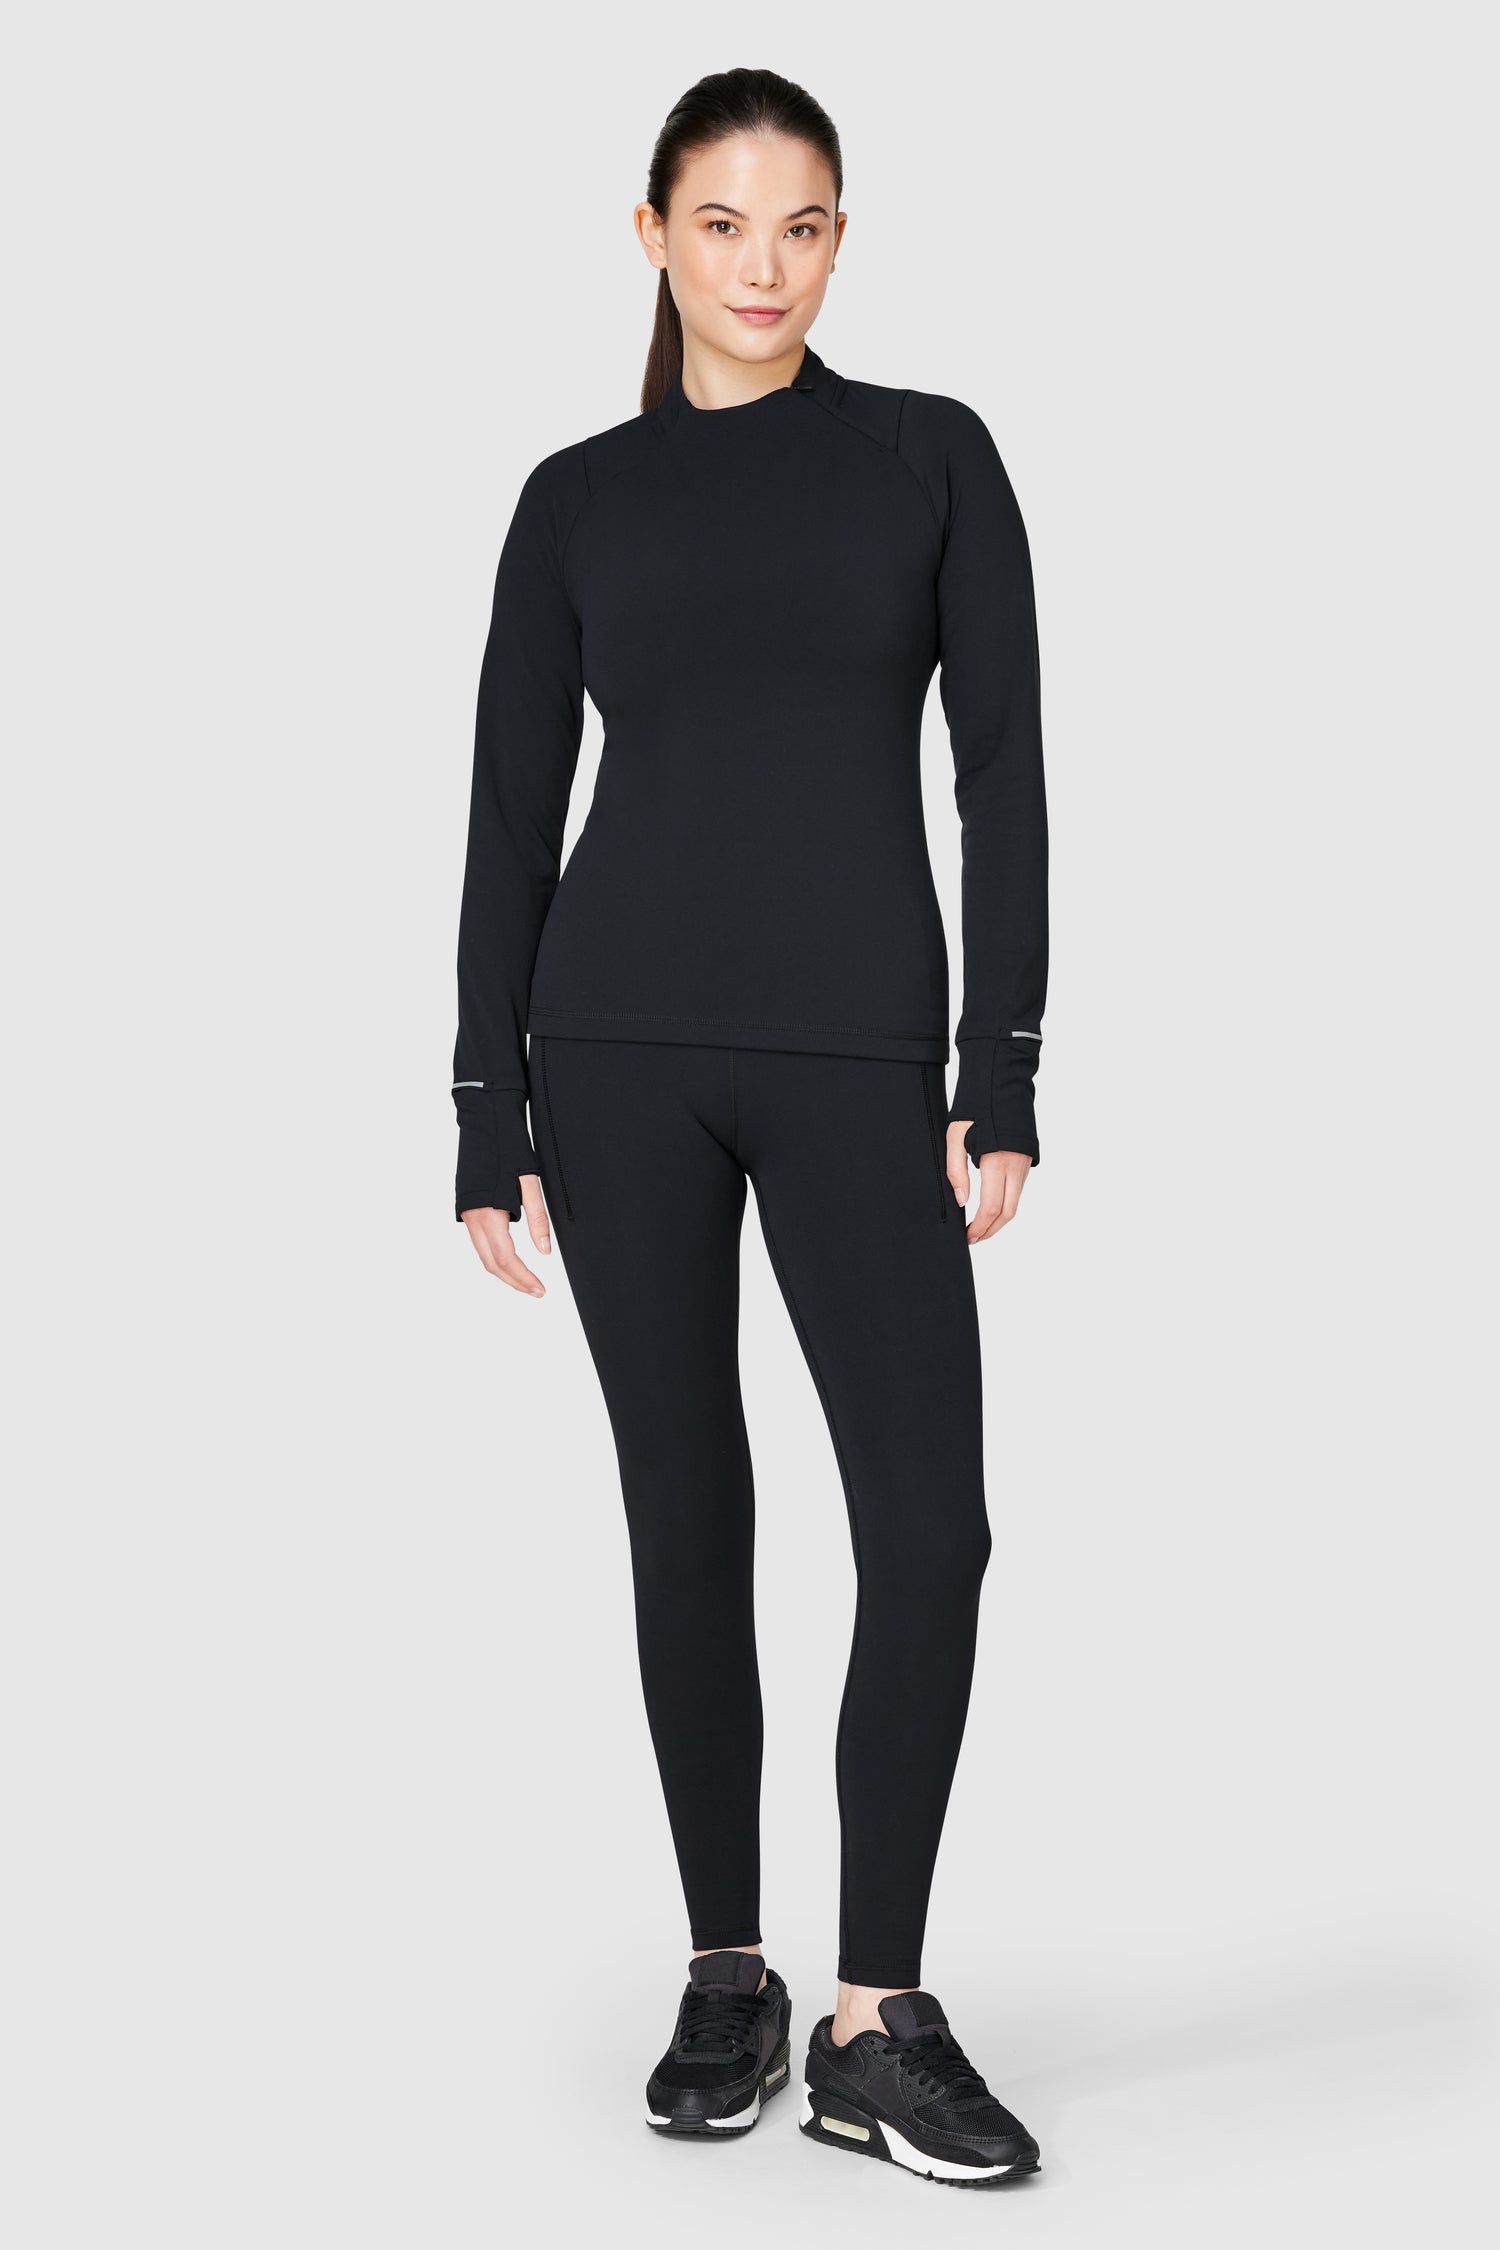 Push FWD Women's Long Sleeve Active Flow Top - BEST SELLING